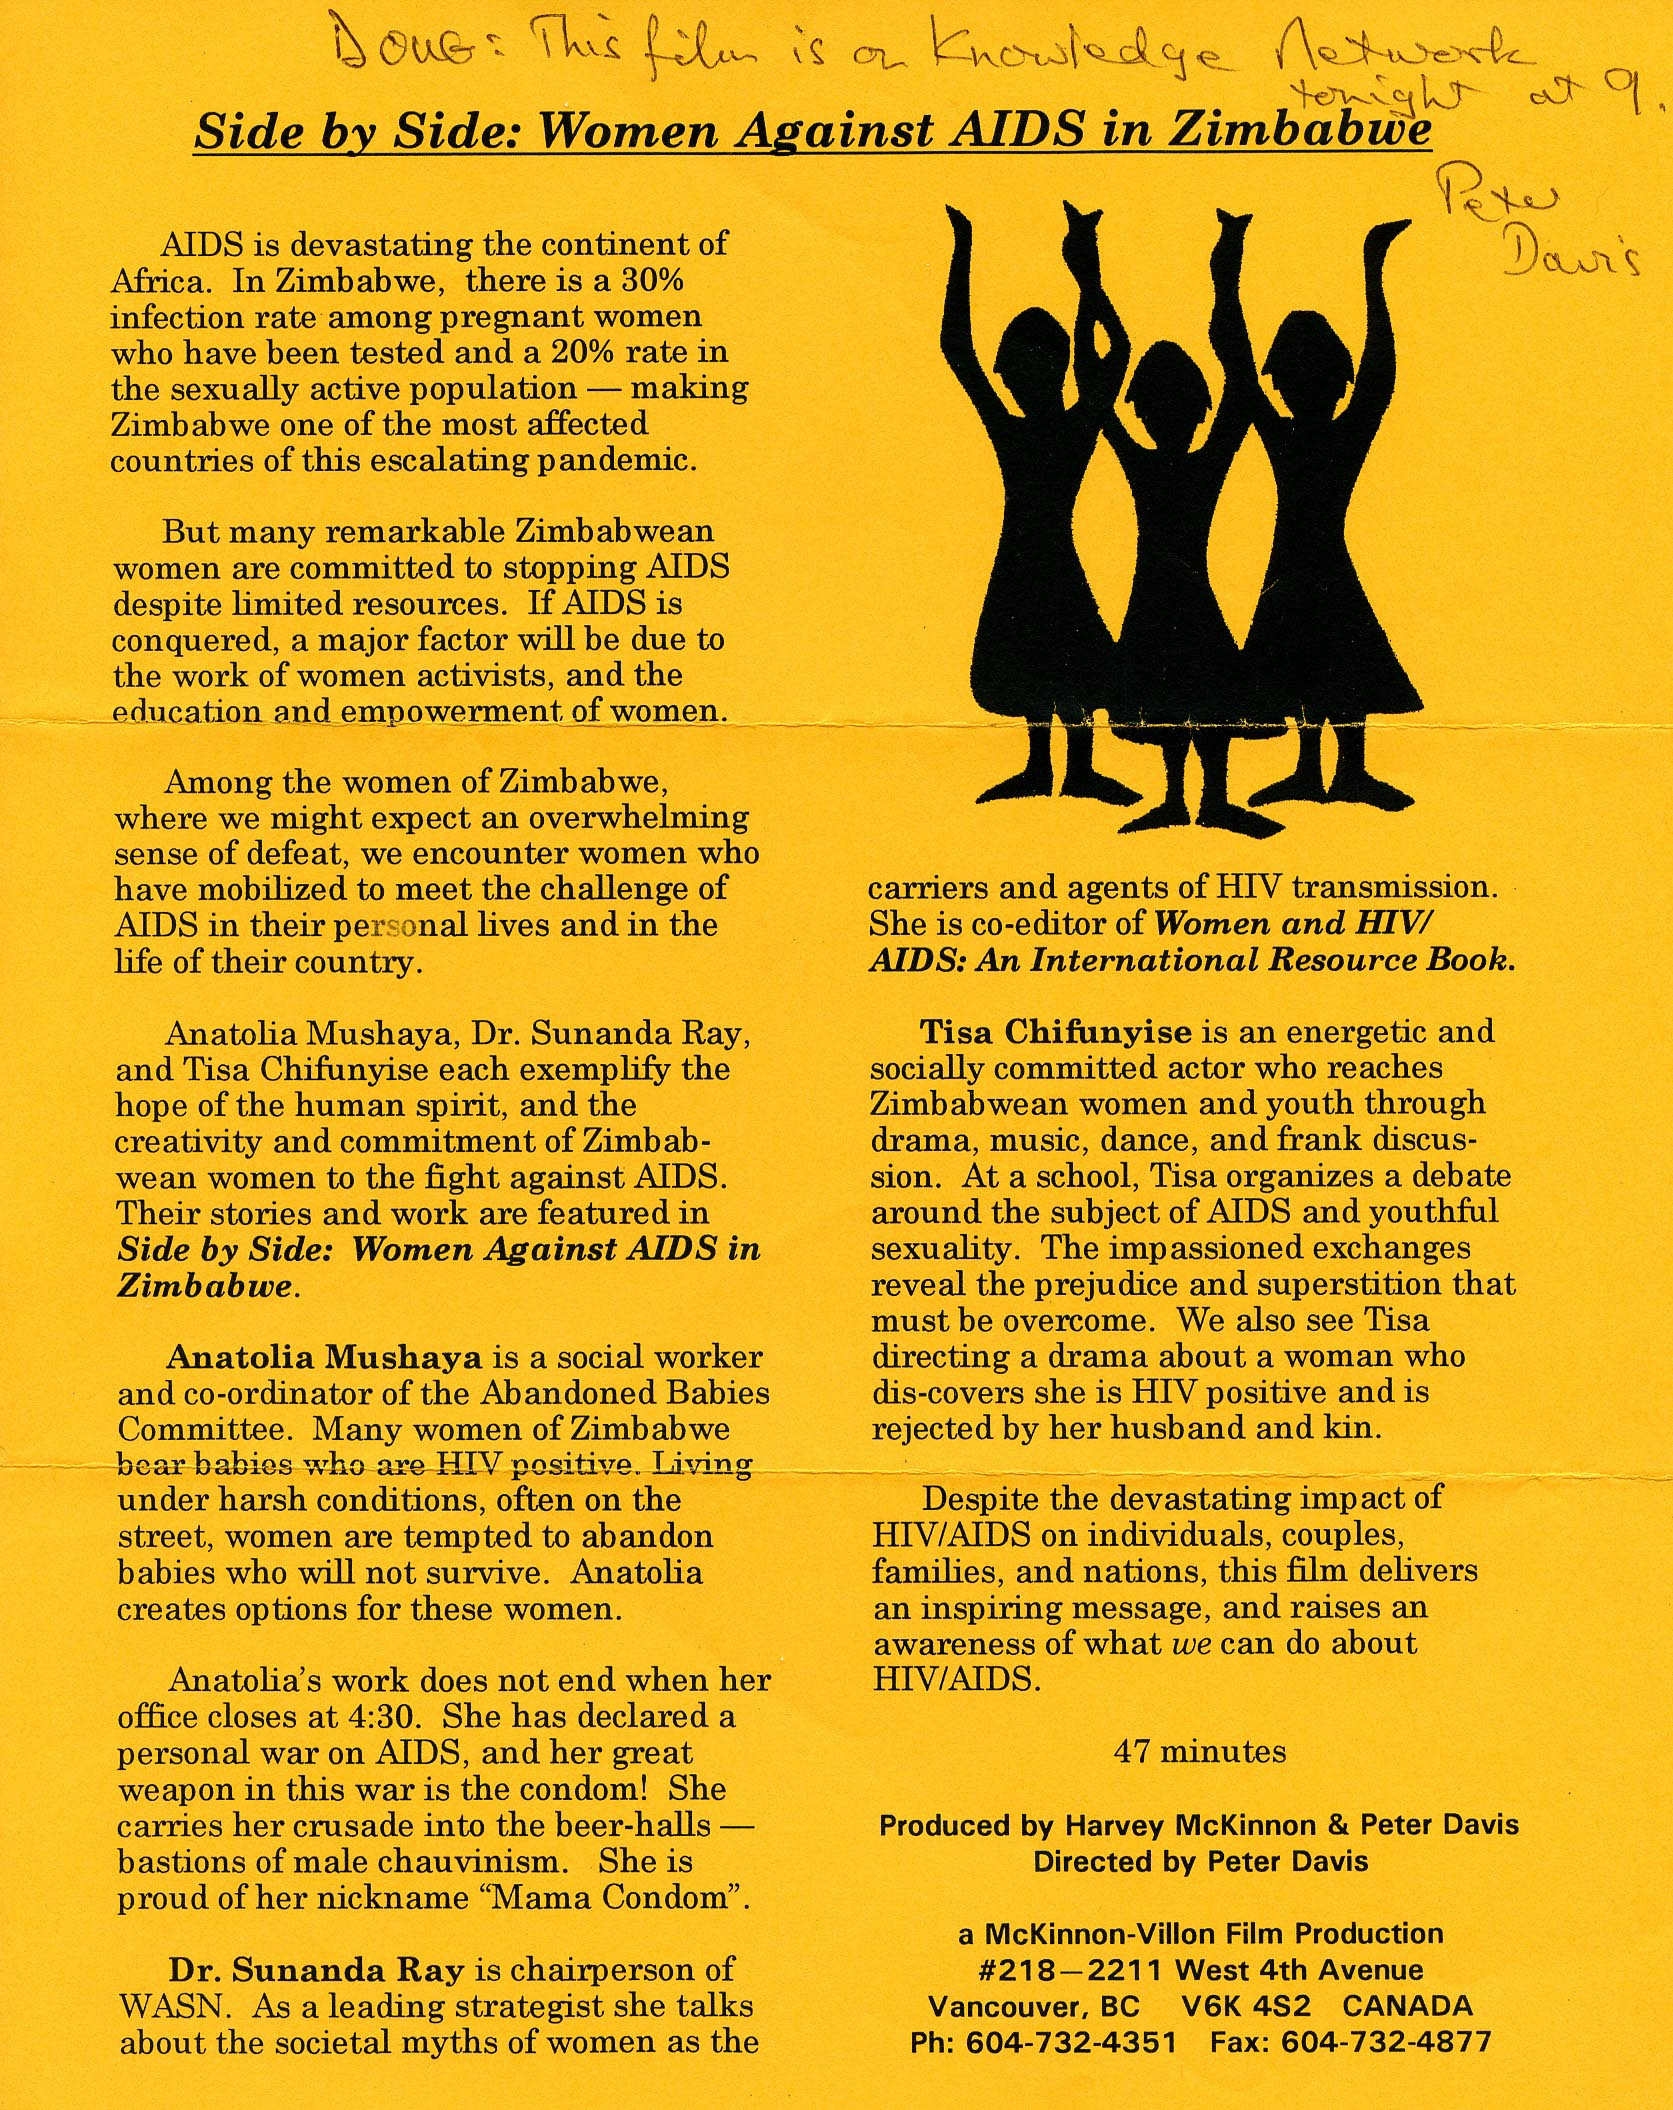 Side By Side: Women Against AIDS in Zimbabwe - Poster.